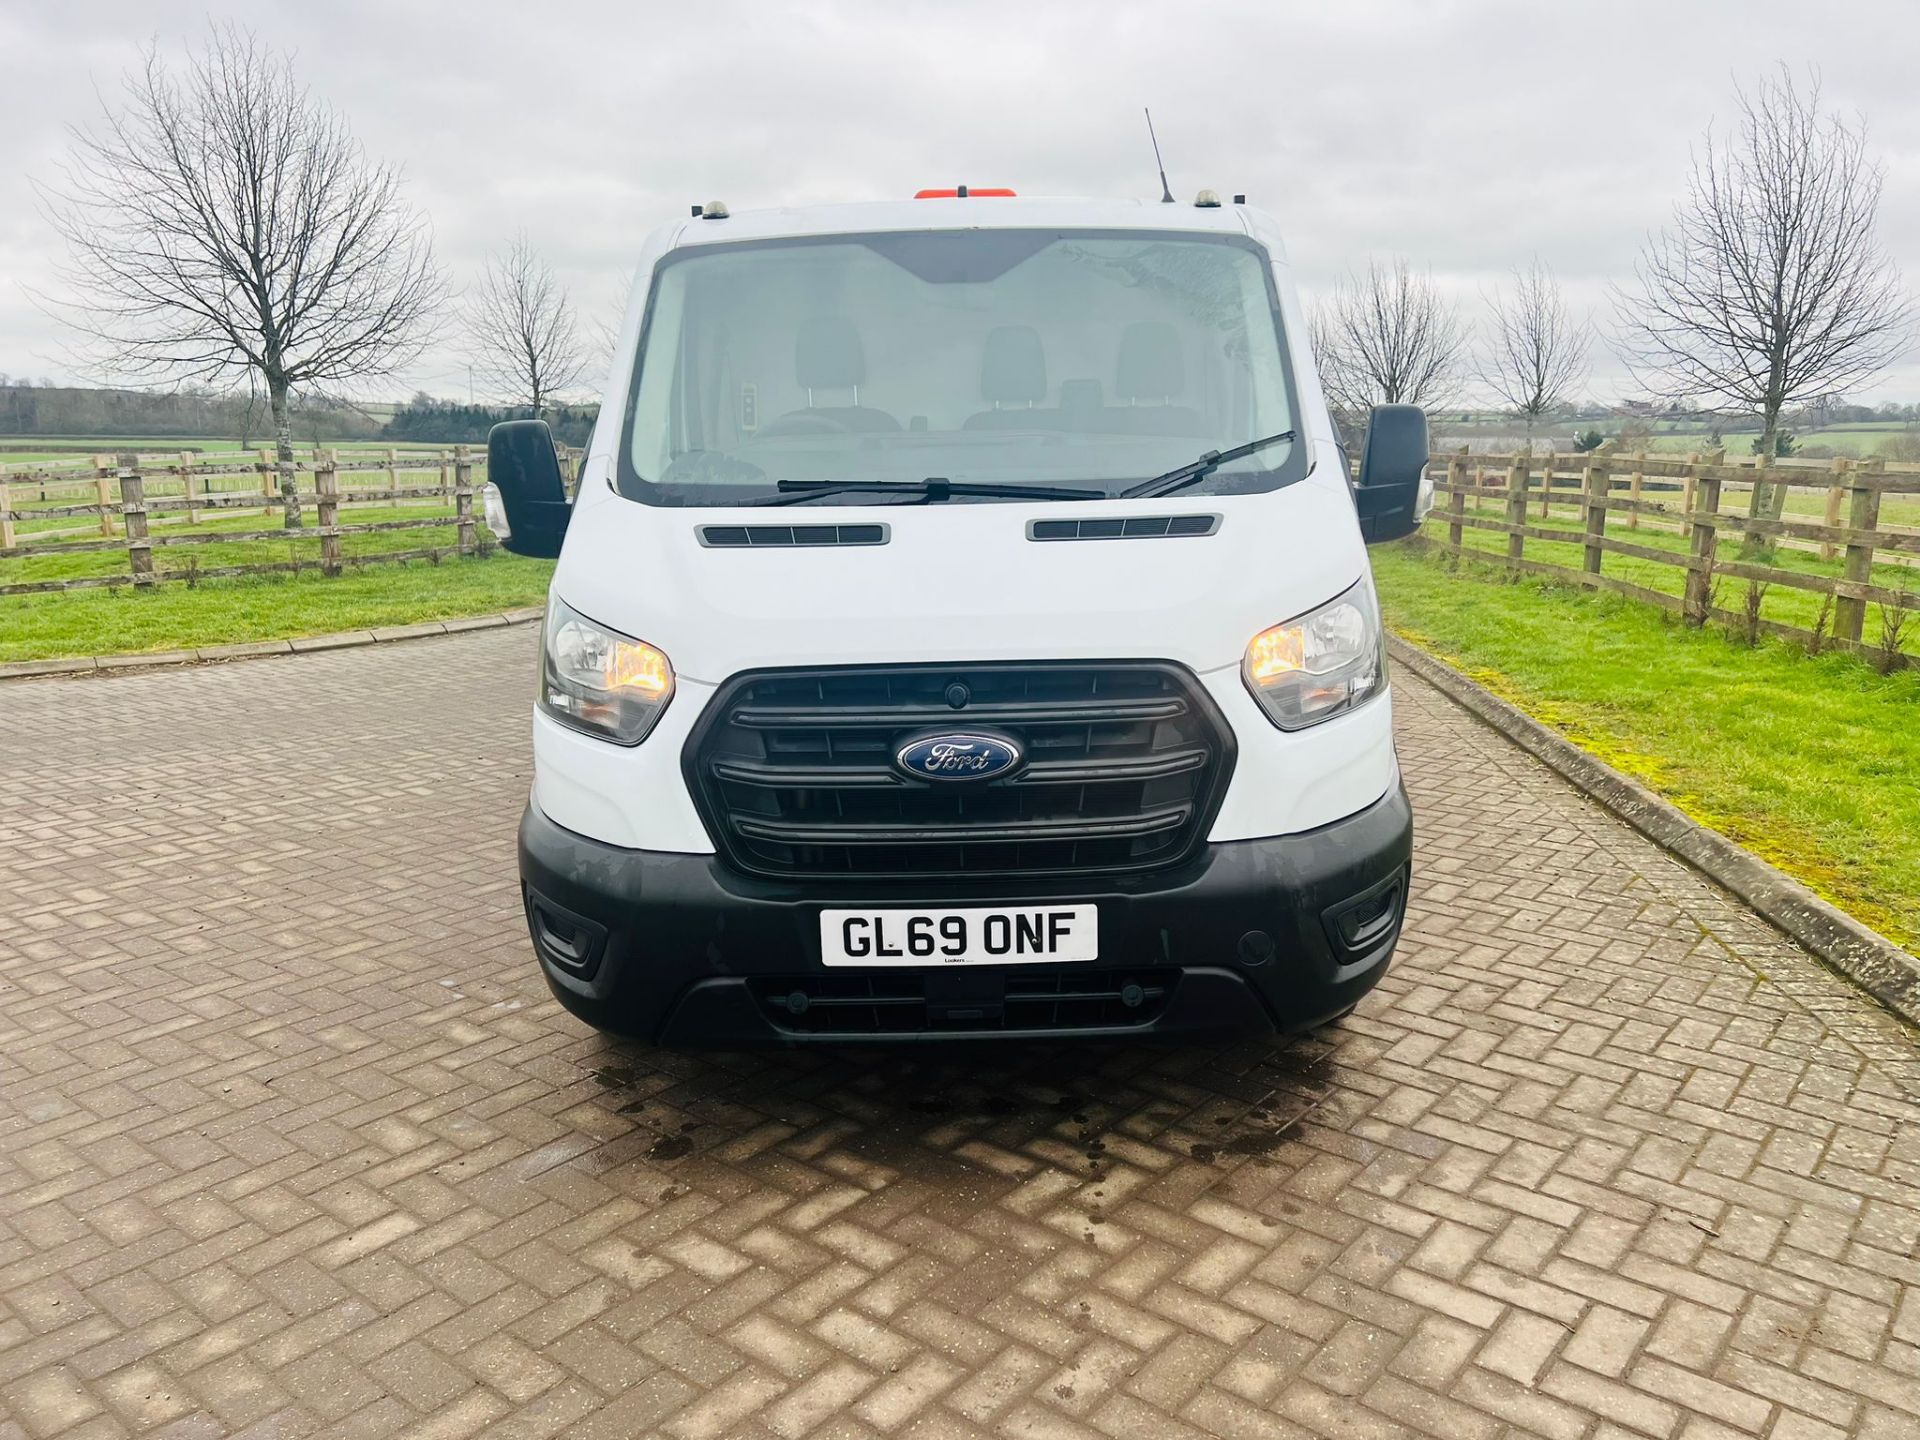 Ford Transit 350 L3 H1 2.0 TDCI Double Cab Tipper 2020 Year - Euro 6 - 1 Owner-SH Print - 57K Only - Image 3 of 20